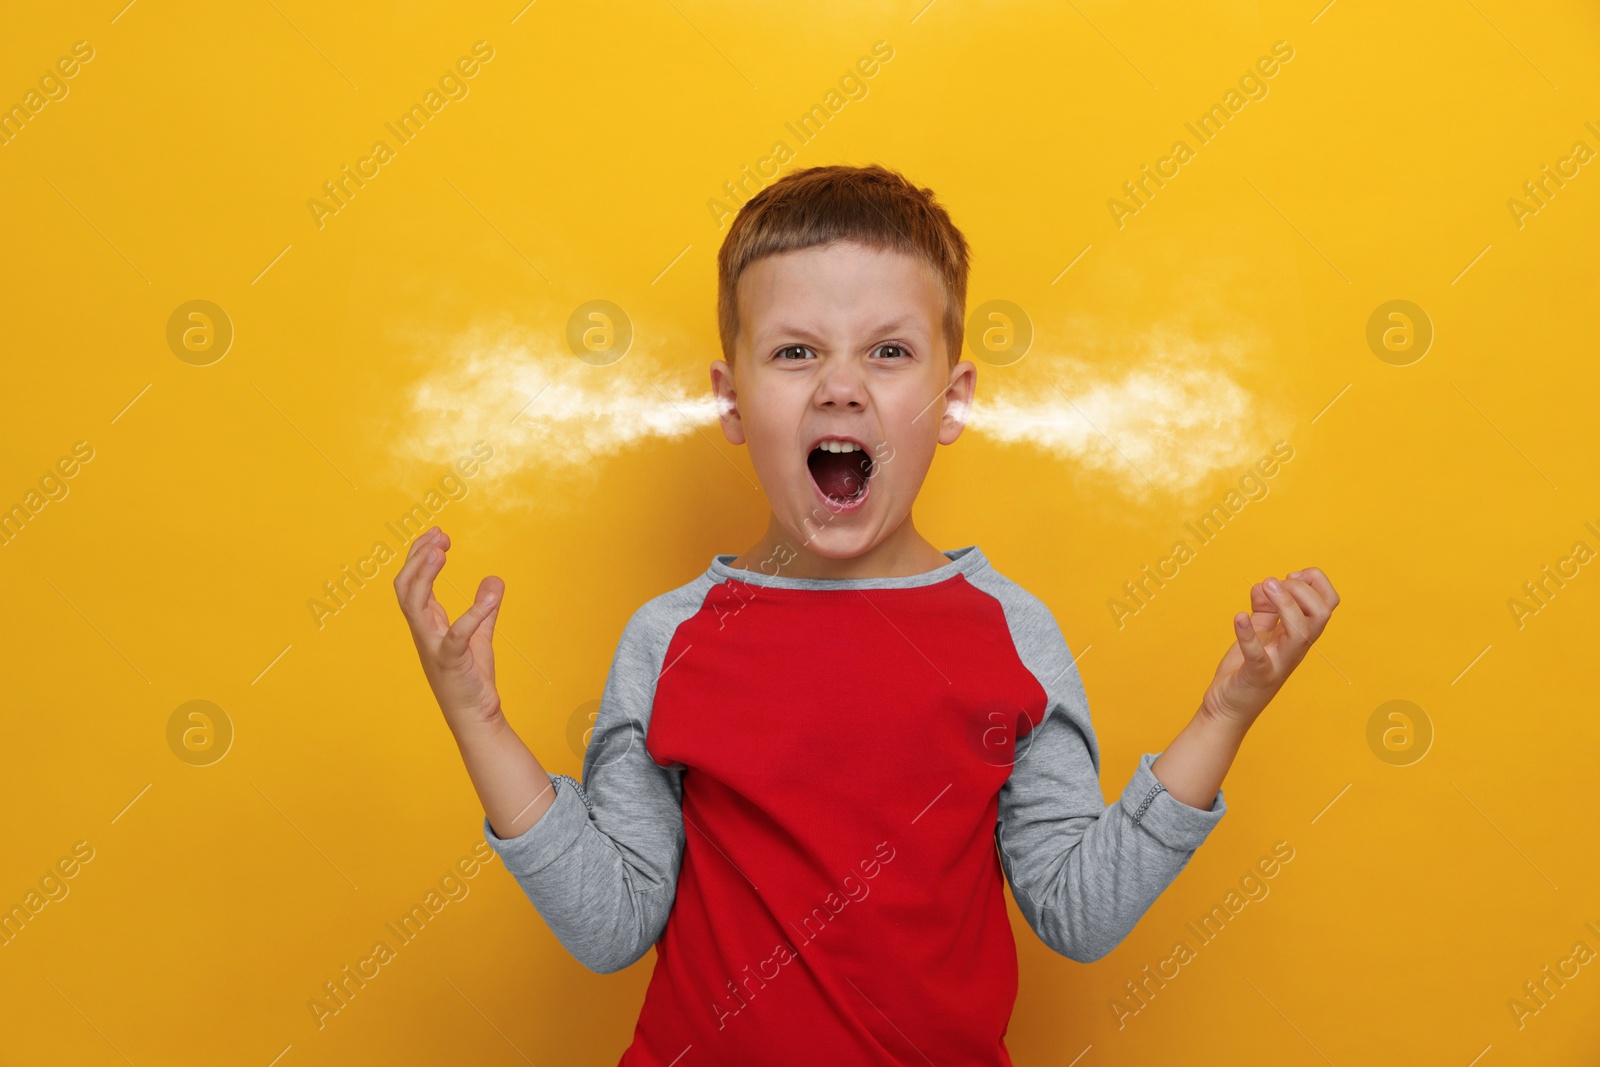 Image of Aggressive little boy with steam coming out of his ears on orange background